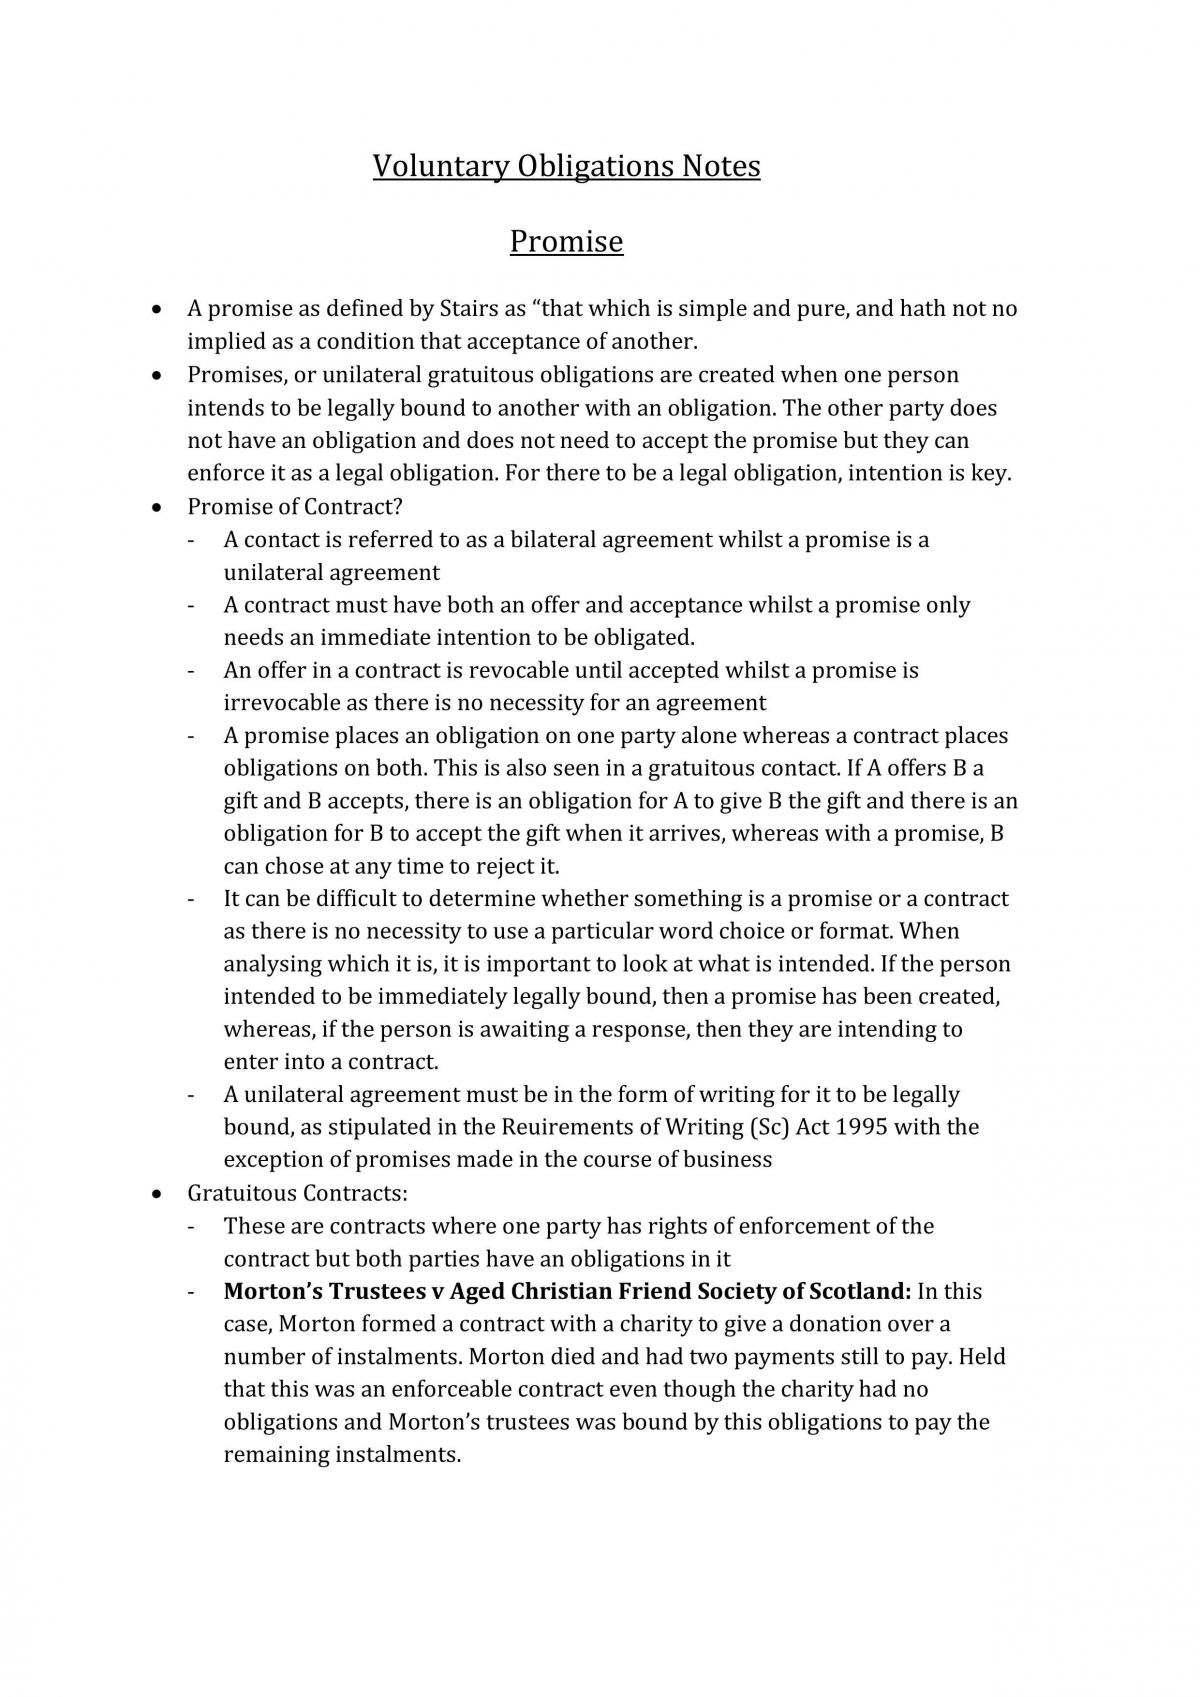 Voluntary Obligations full notes  - Page 1